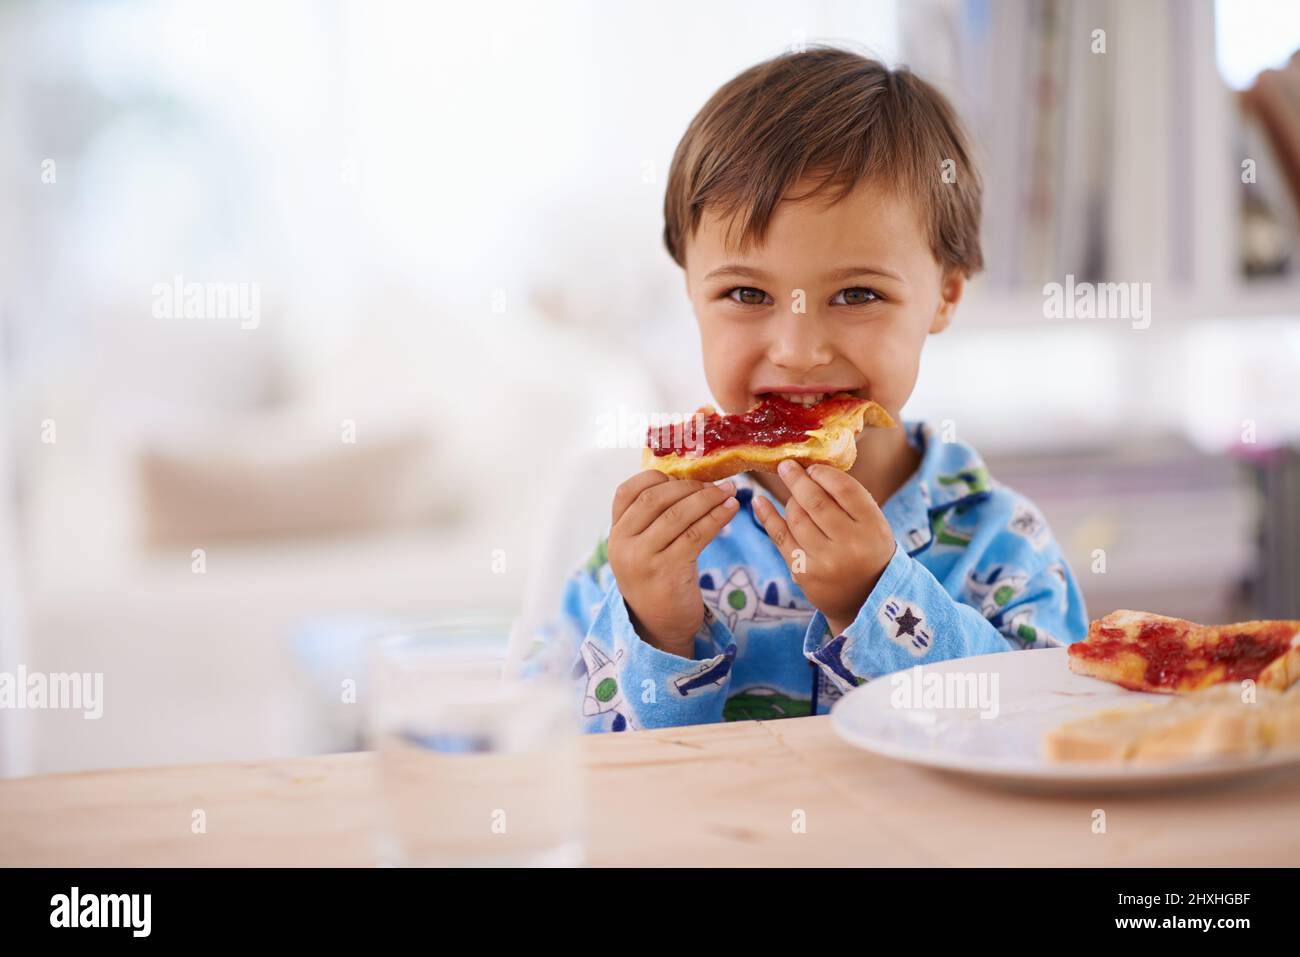 Nothing beats a good breakfast. A cute little boy eating toast with jam. Stock Photo